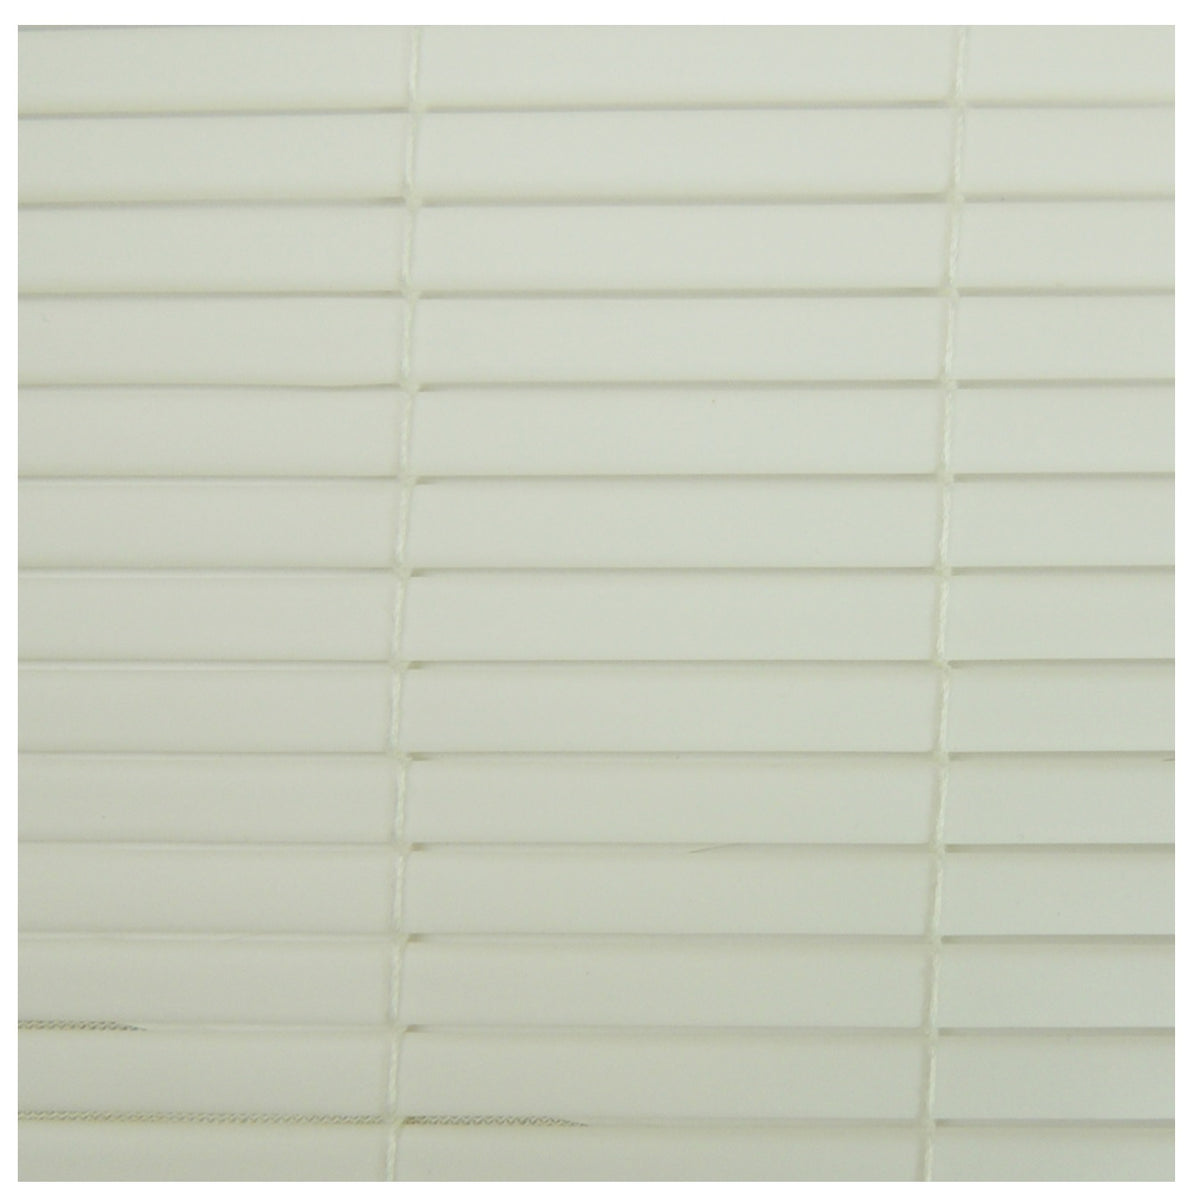 Radiance 3320166 Rollup Shade, 72" x 72"